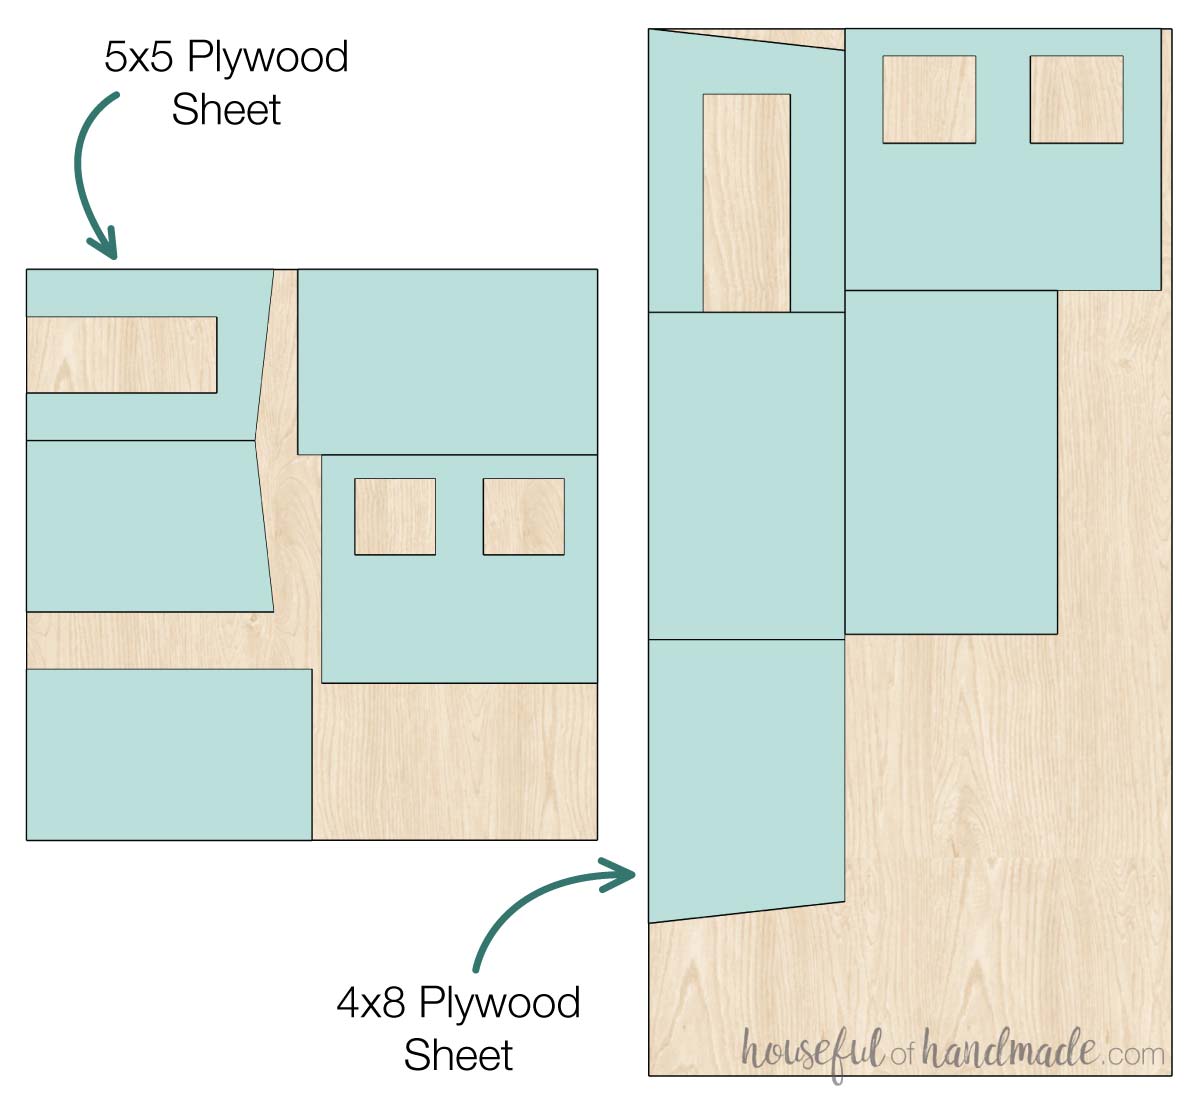 Plywood cut diagrams for 5x5 and 4x8 sheets. 